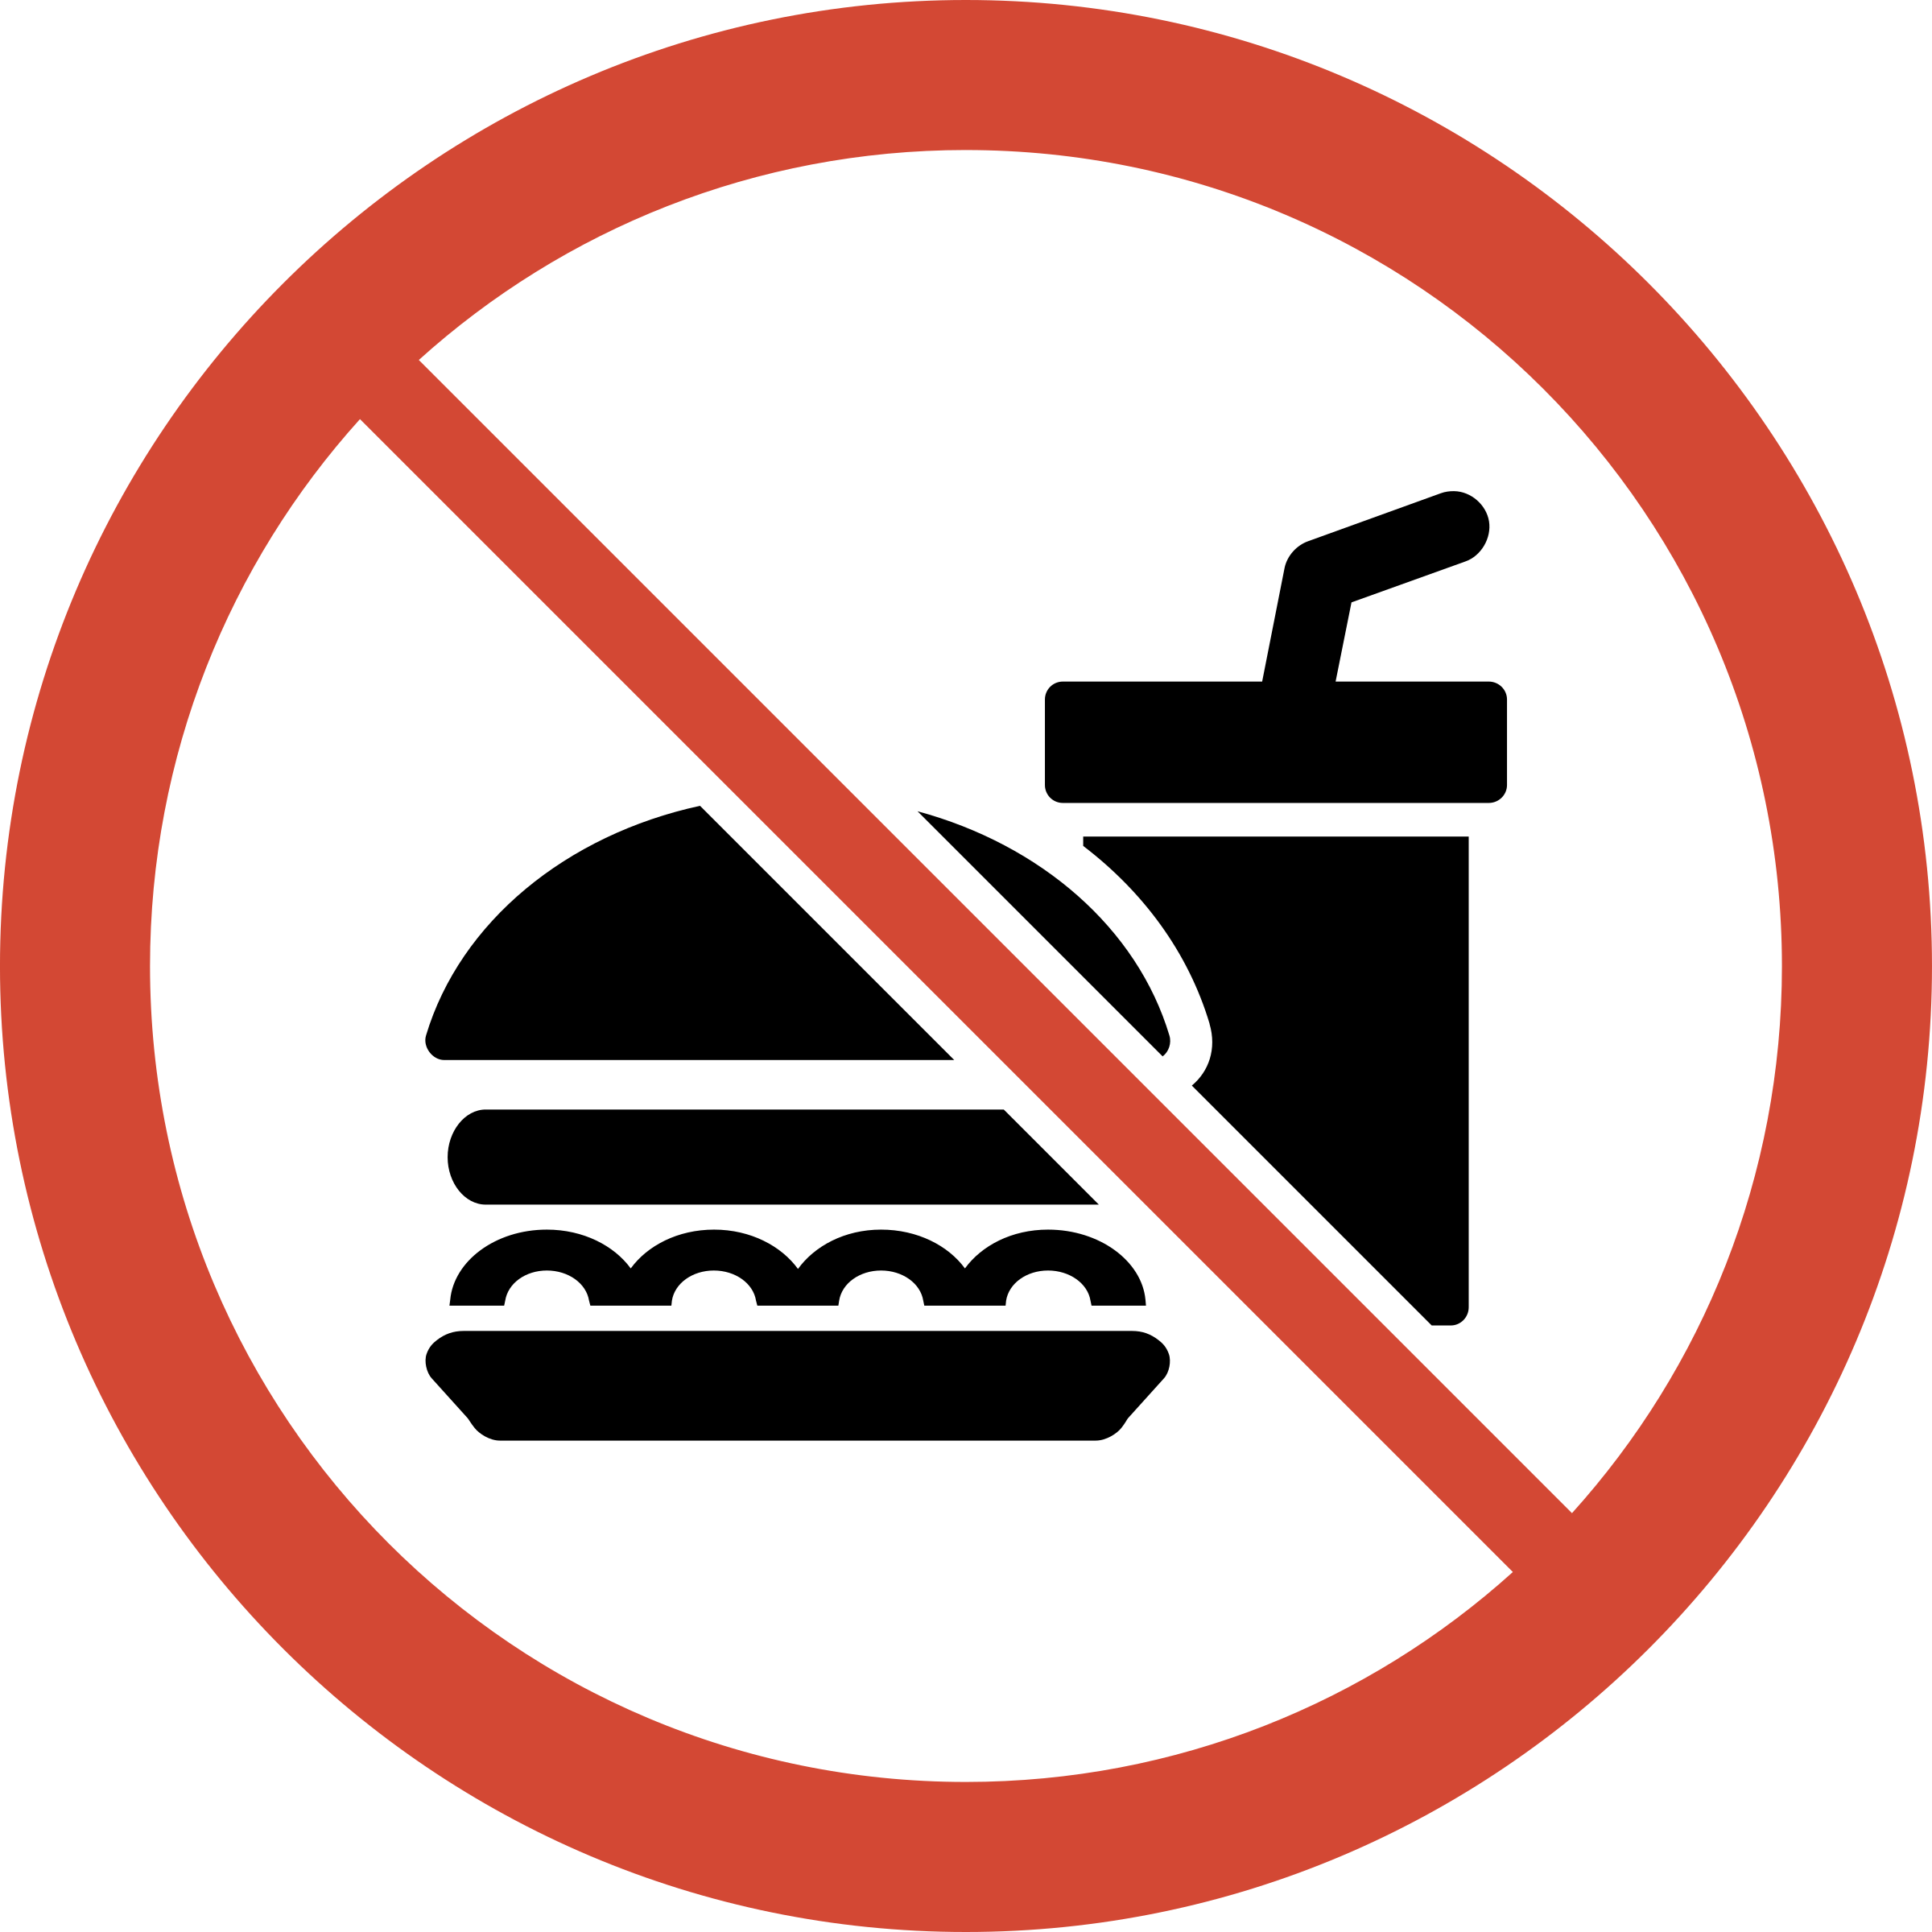 No food or drinks clipart ... - No Food Or Drink Clipart